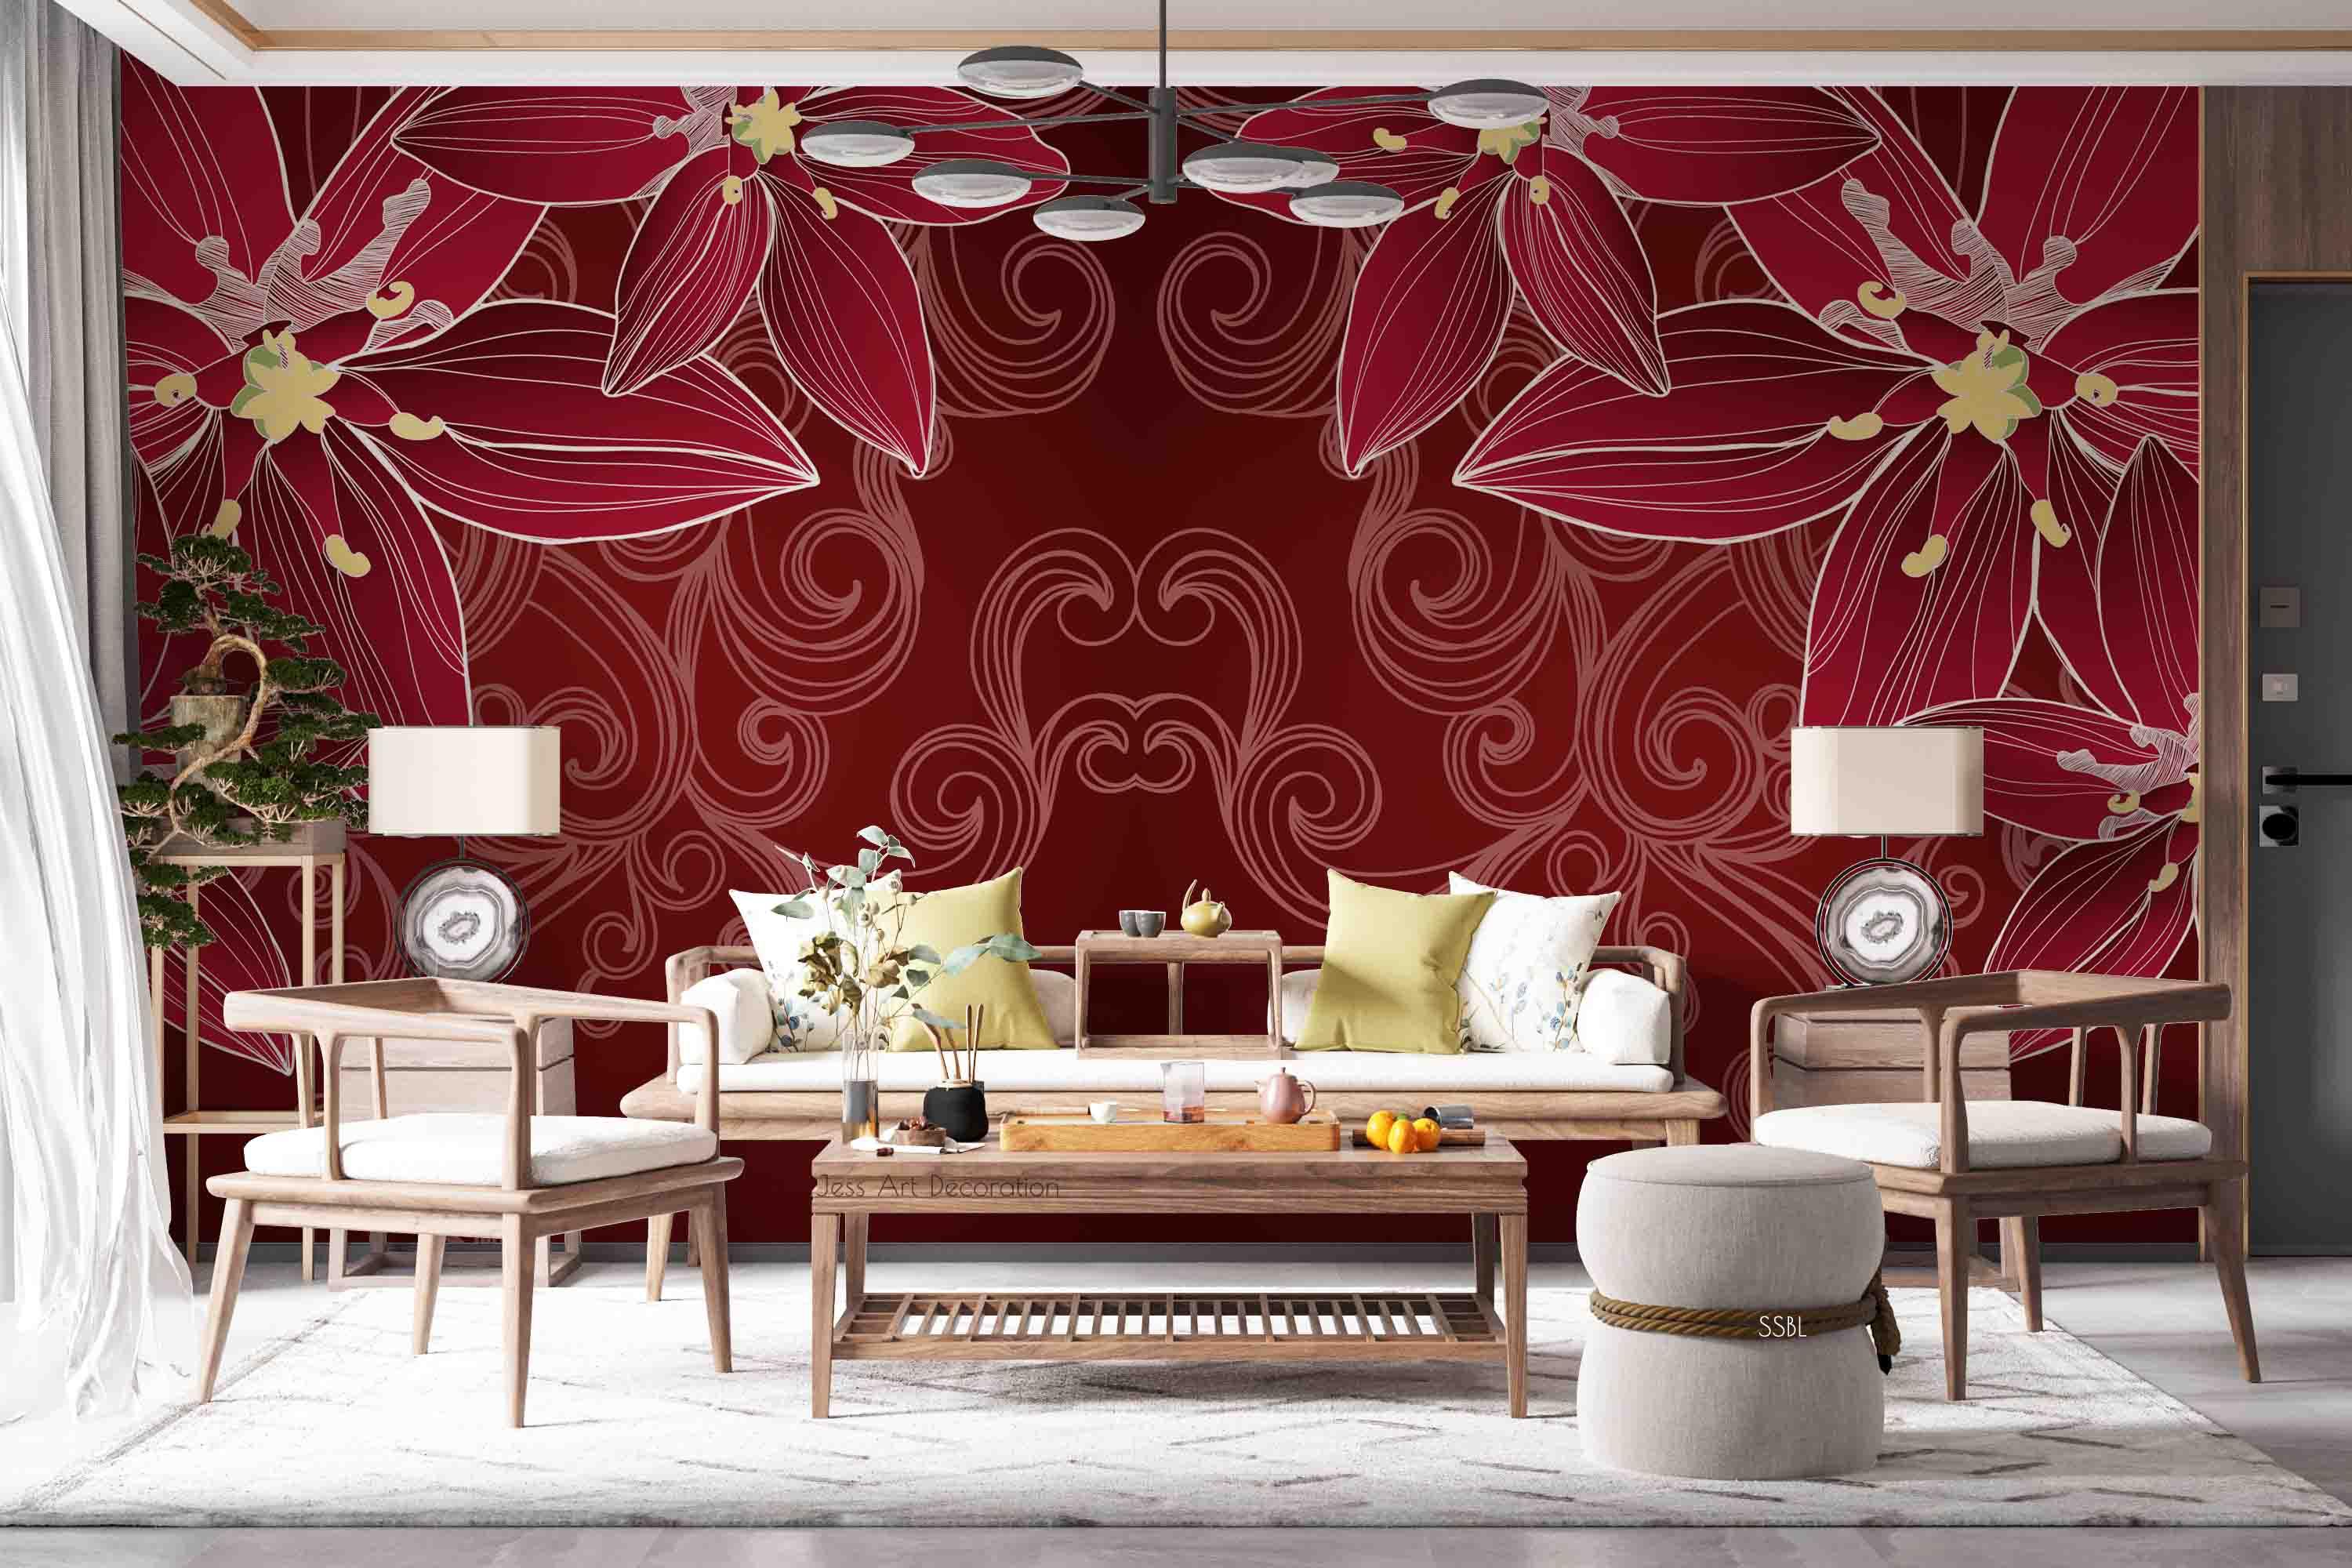 3D Abstract Vintage Red Lily Floral Pattern Wall Mural Wallpaper GD 3652- Jess Art Decoration